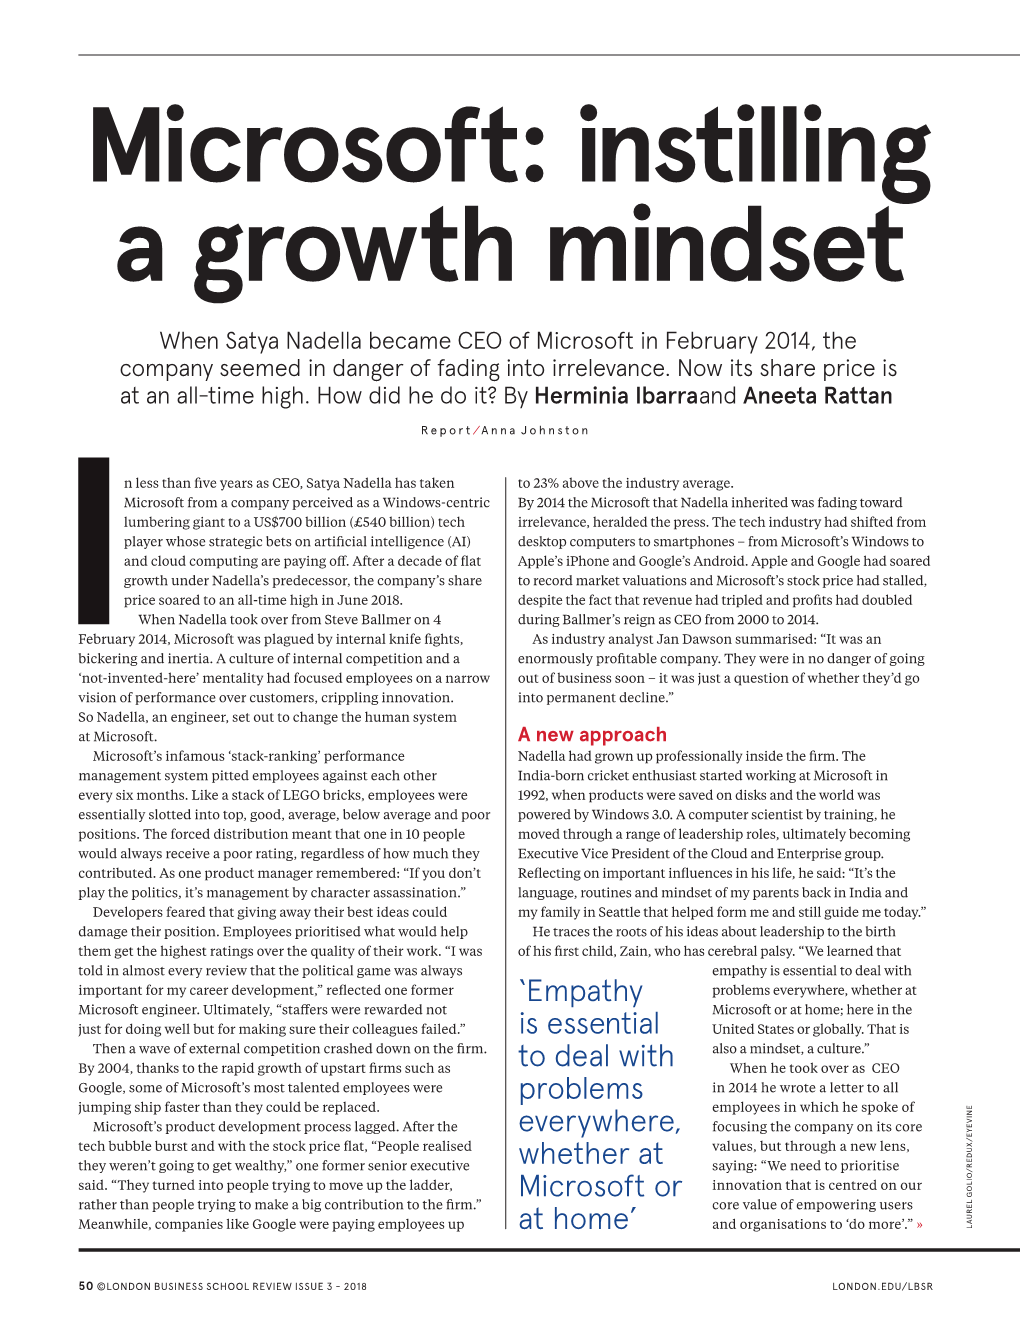 Microsoft: Instilling a Growth Mindset When Satya Nadella Became CEO of Microsoft in February 2014, the Company Seemed in Danger of Fading Into Irrelevance